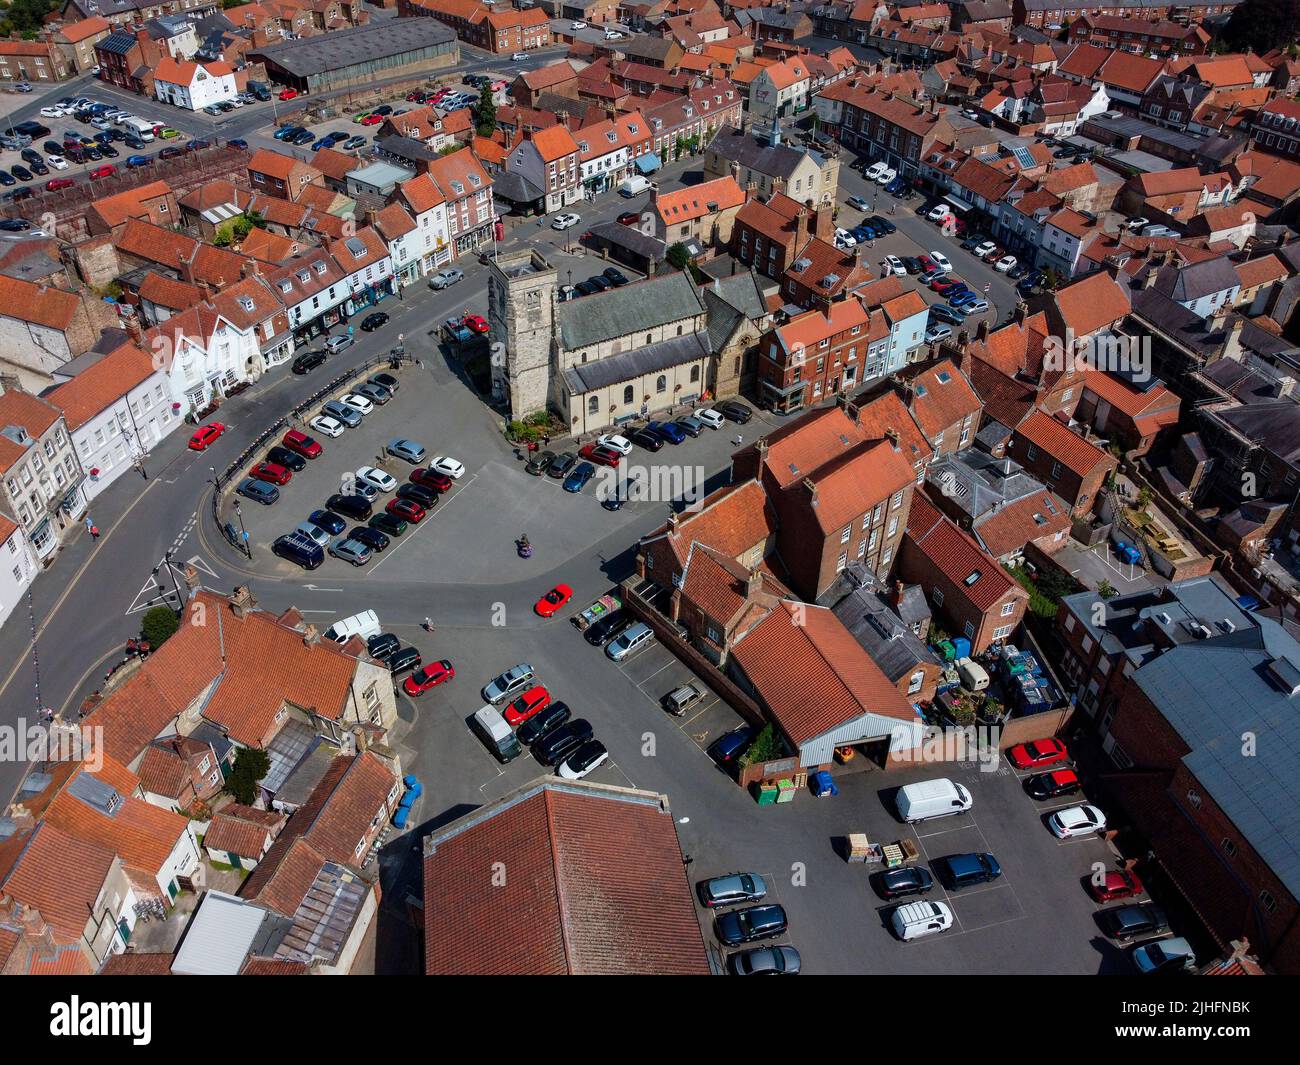 Aerial view of the market square in the market town of Malton in North Yorkshire in the northeast of England. Stock Photo